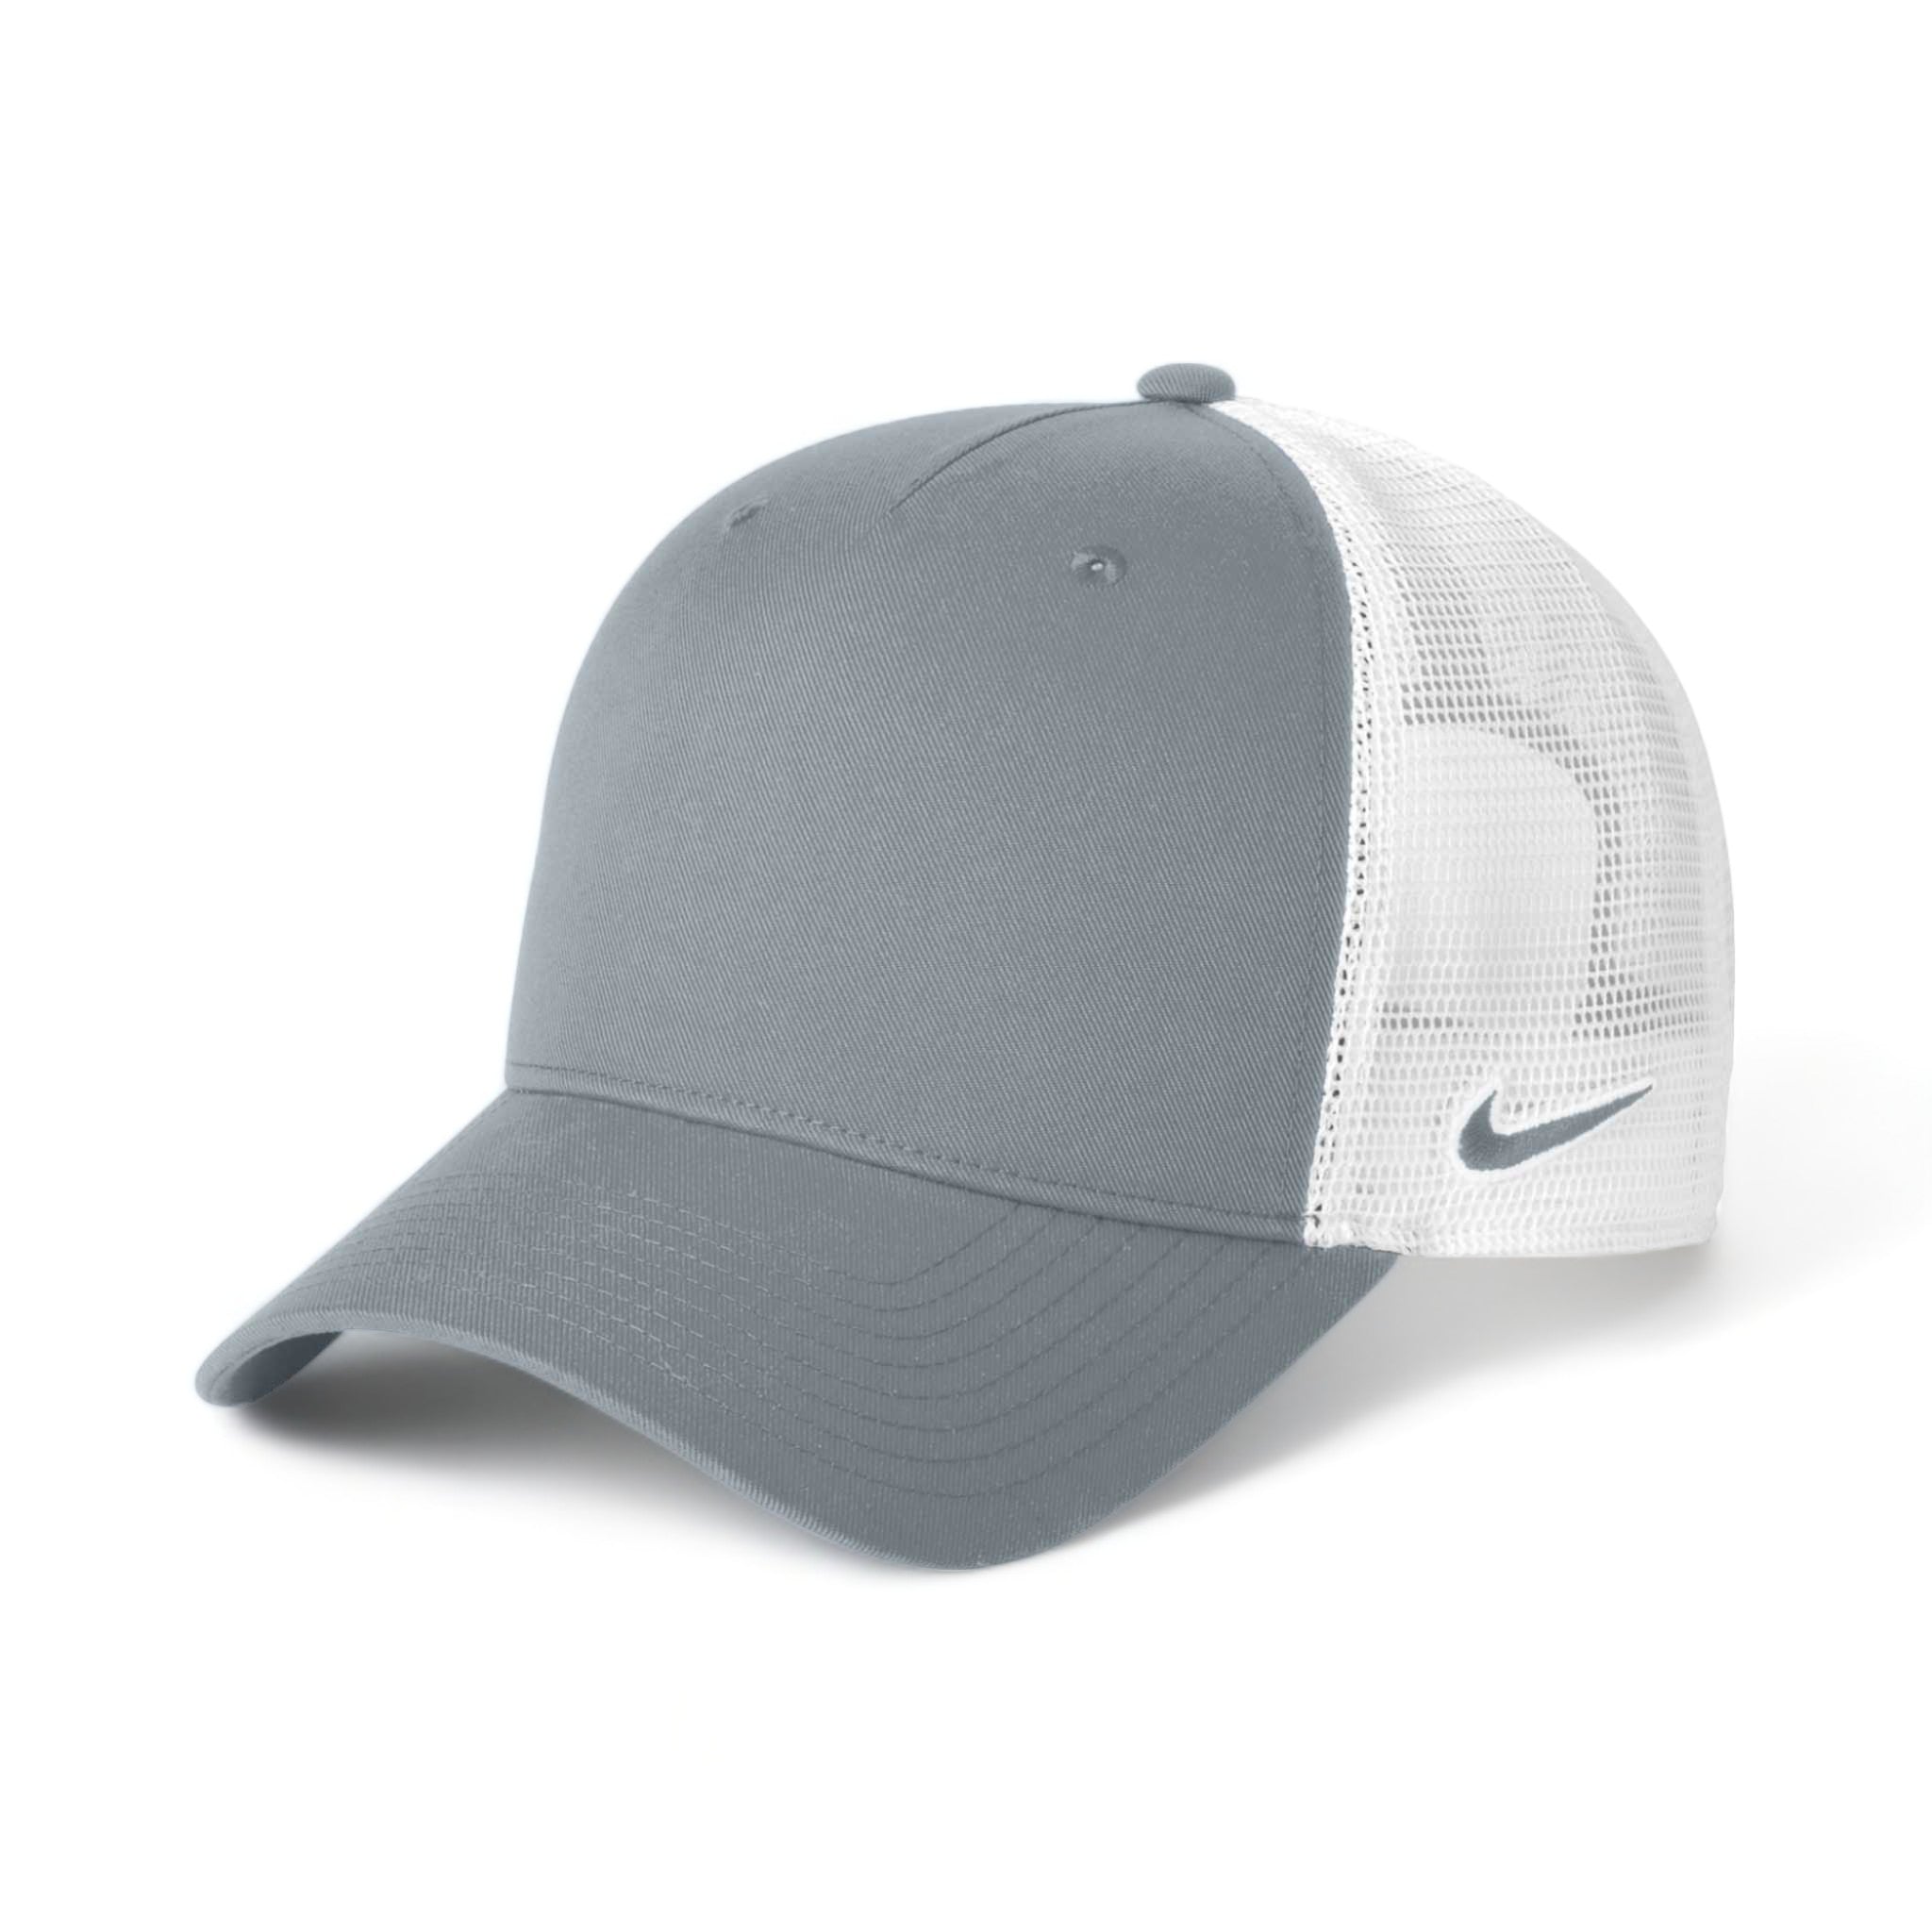 Side view of Nike NKFN9893 custom hat in cool grey and white